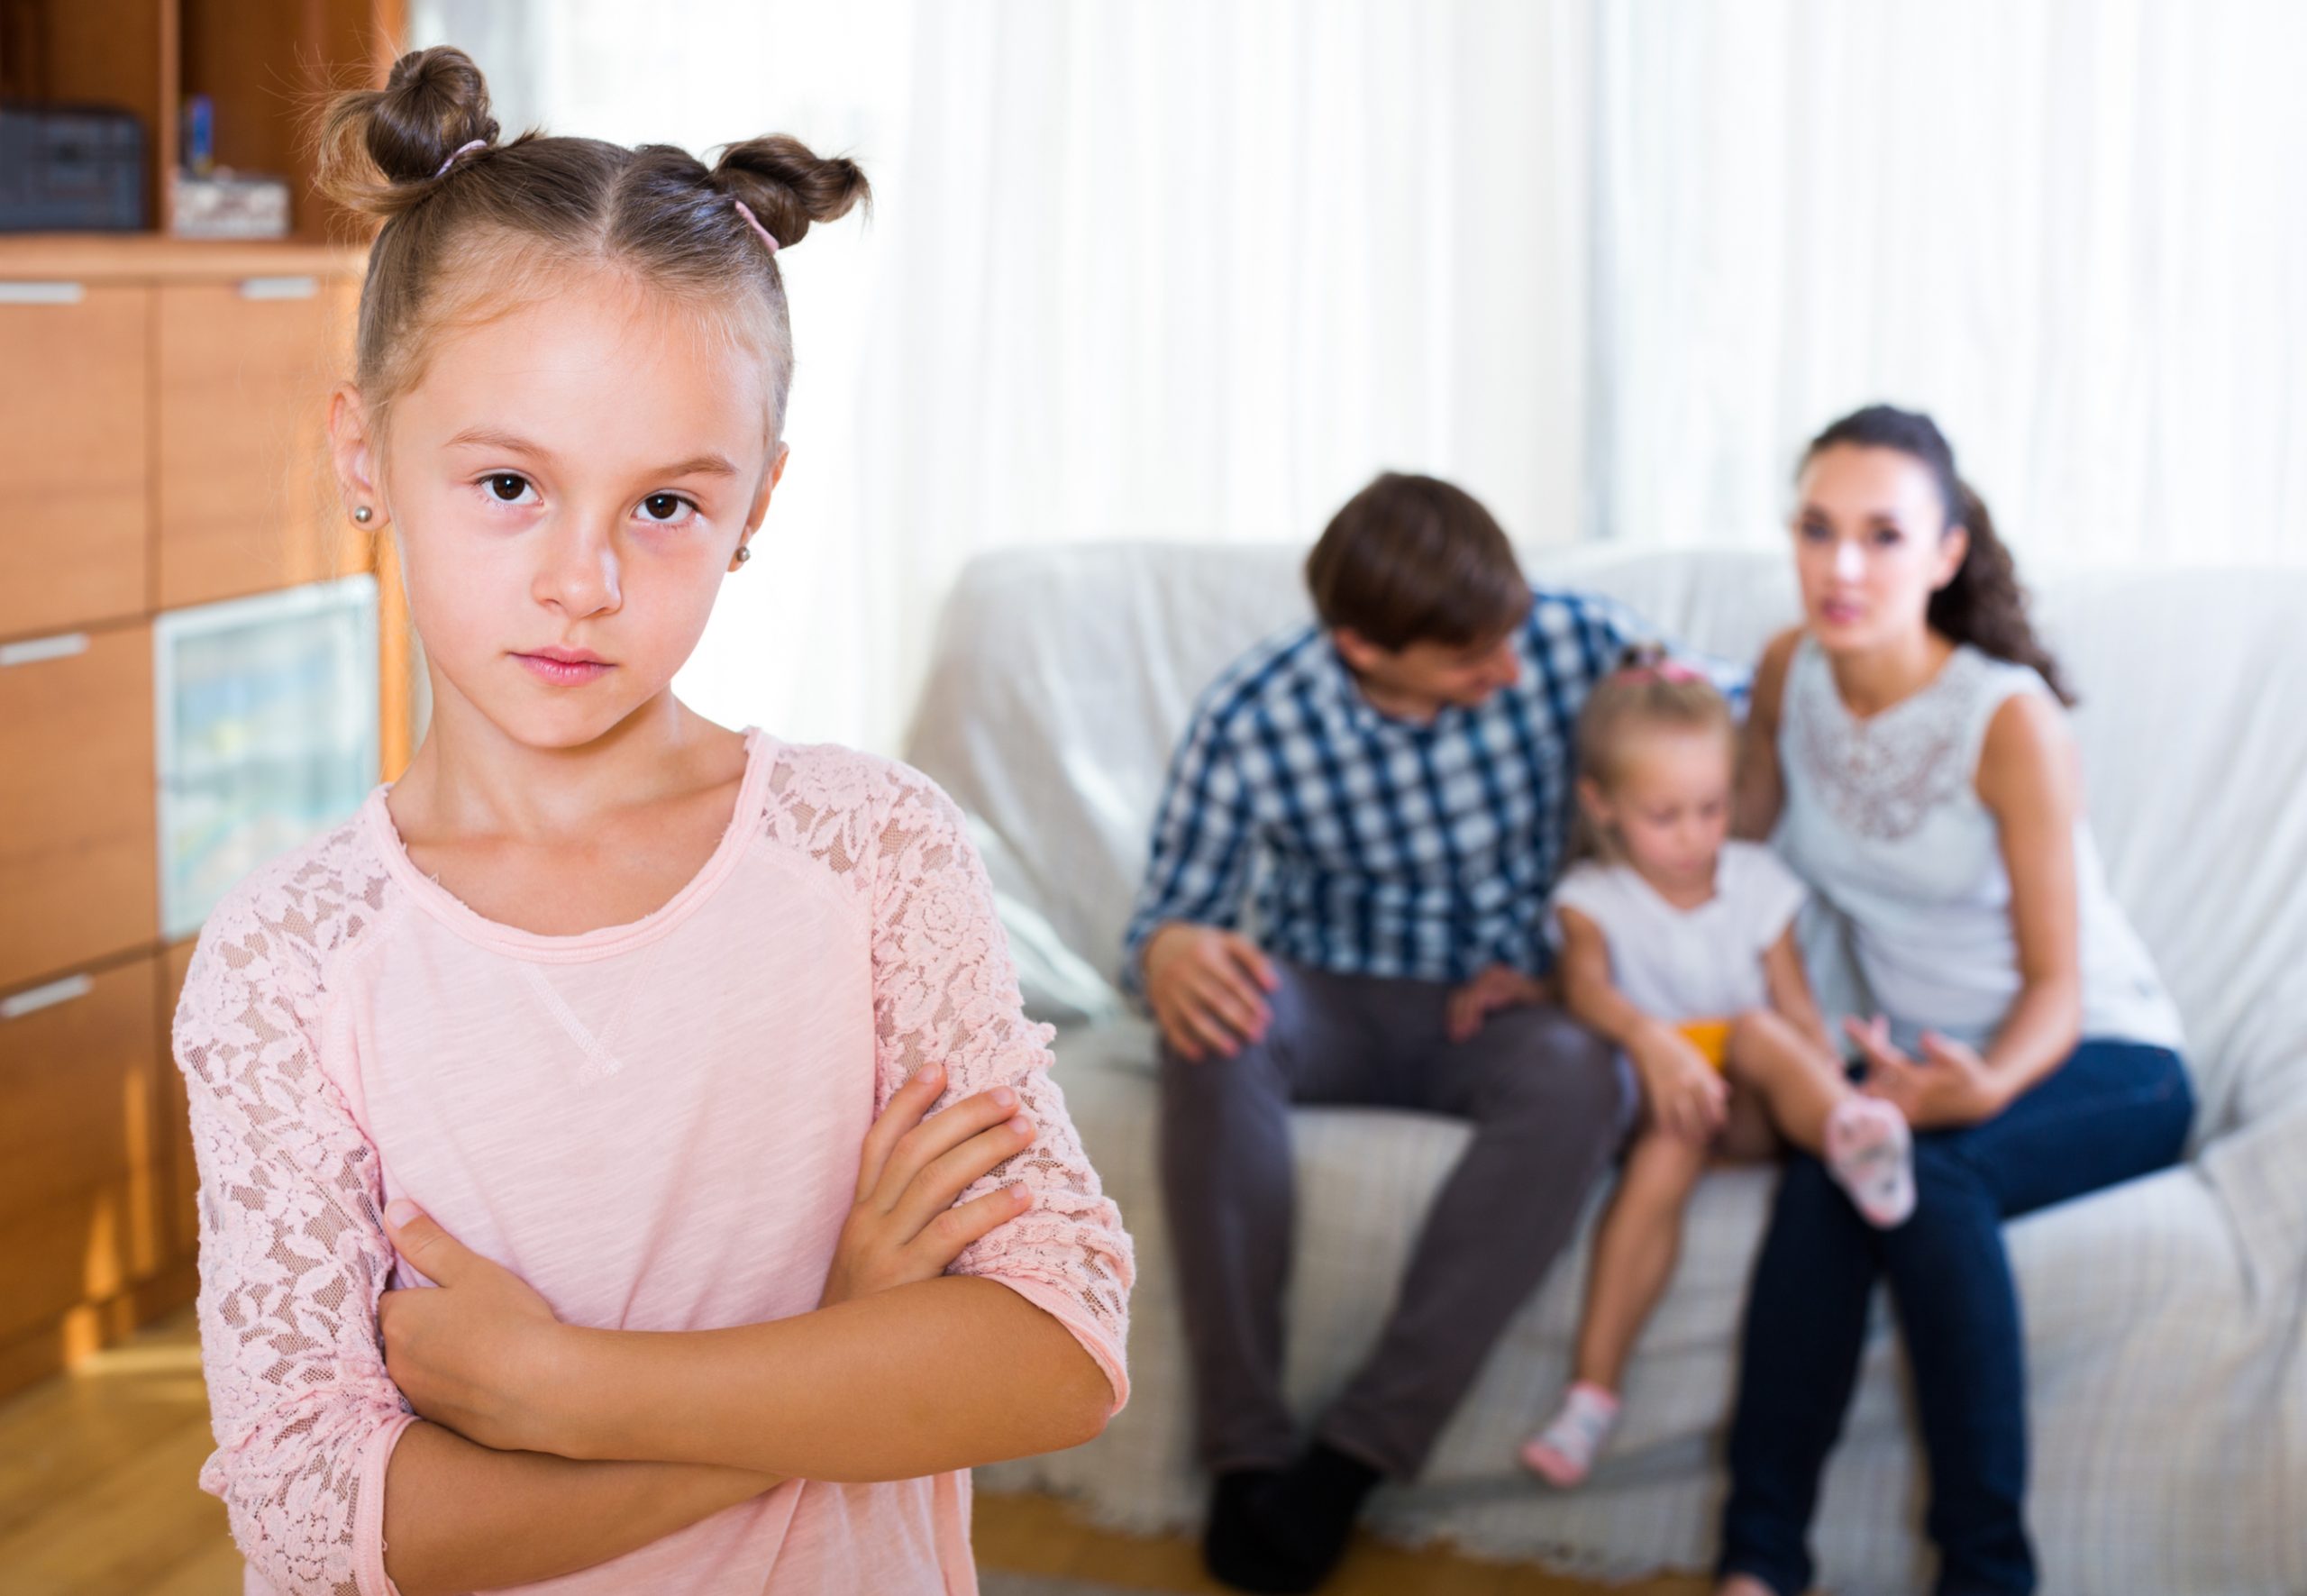 5 Secret Signs to Recognize Jealous Family Members